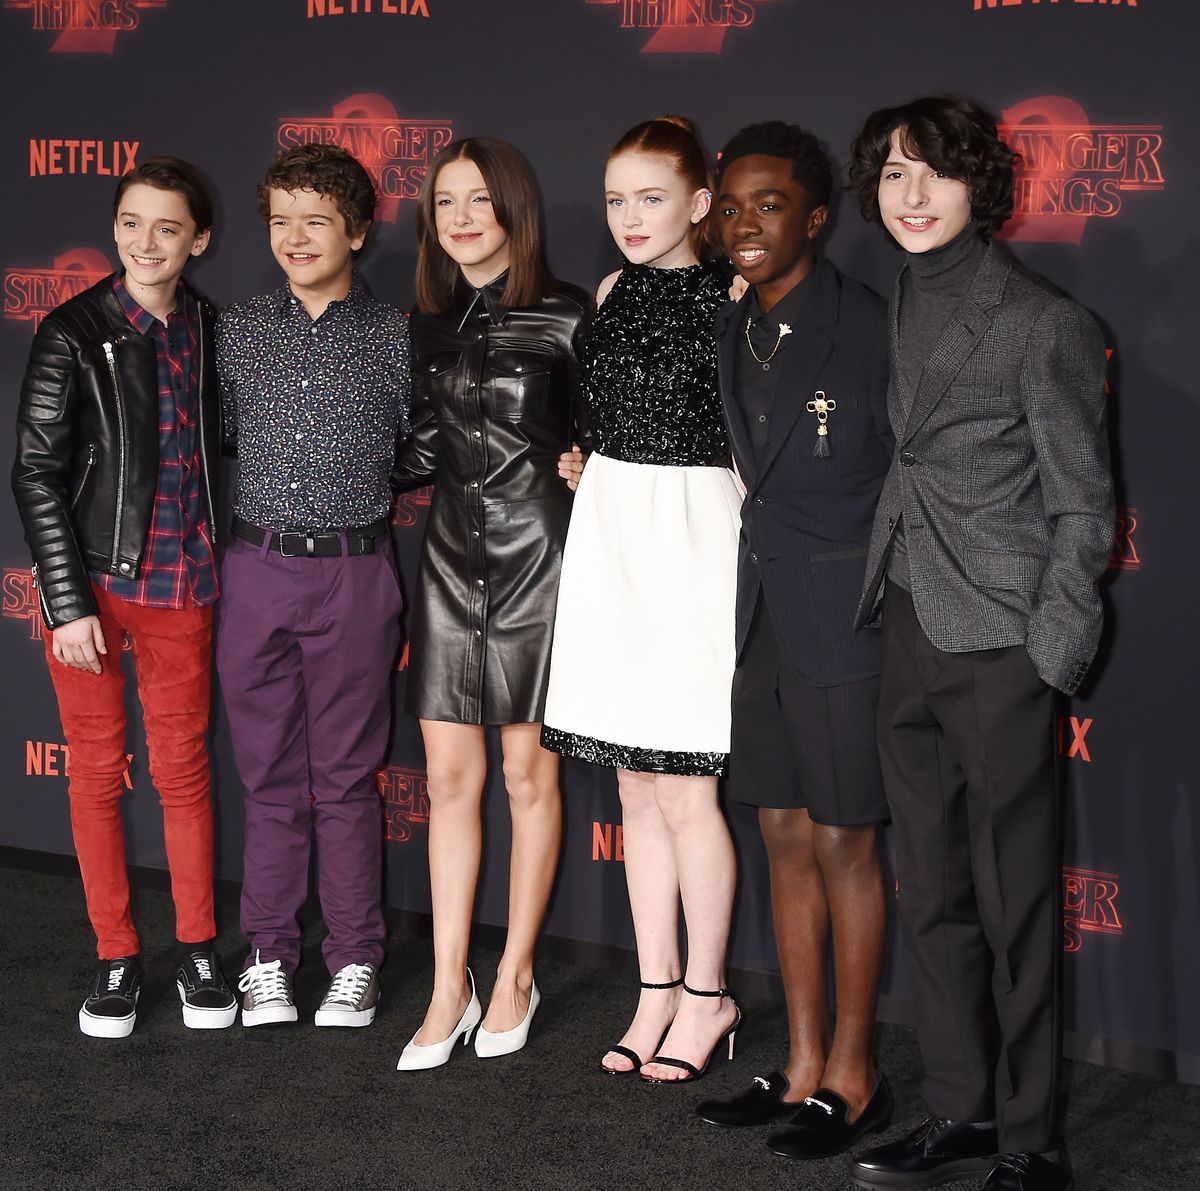 Here's Everything the 'Stranger Things' Cast Is Doing After Season 3